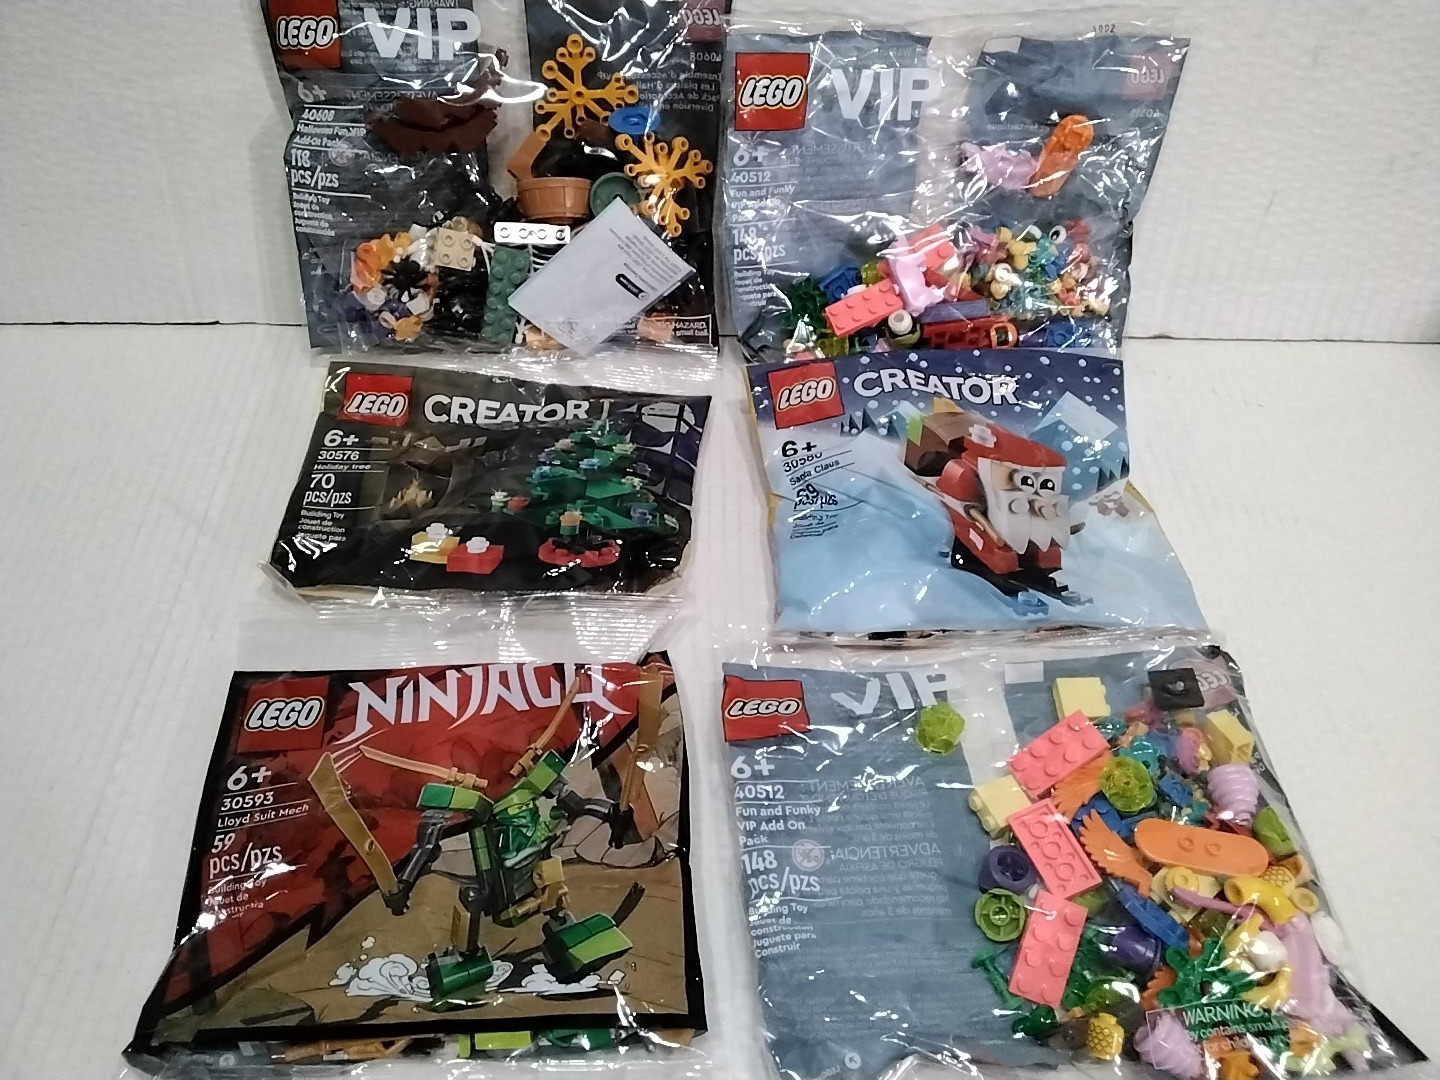 Sold all my original Lego Batman themed sets (11 total) Summer '09 to help  with $$ - as of today I've reclaimed 5 and could not be happier : r/lego